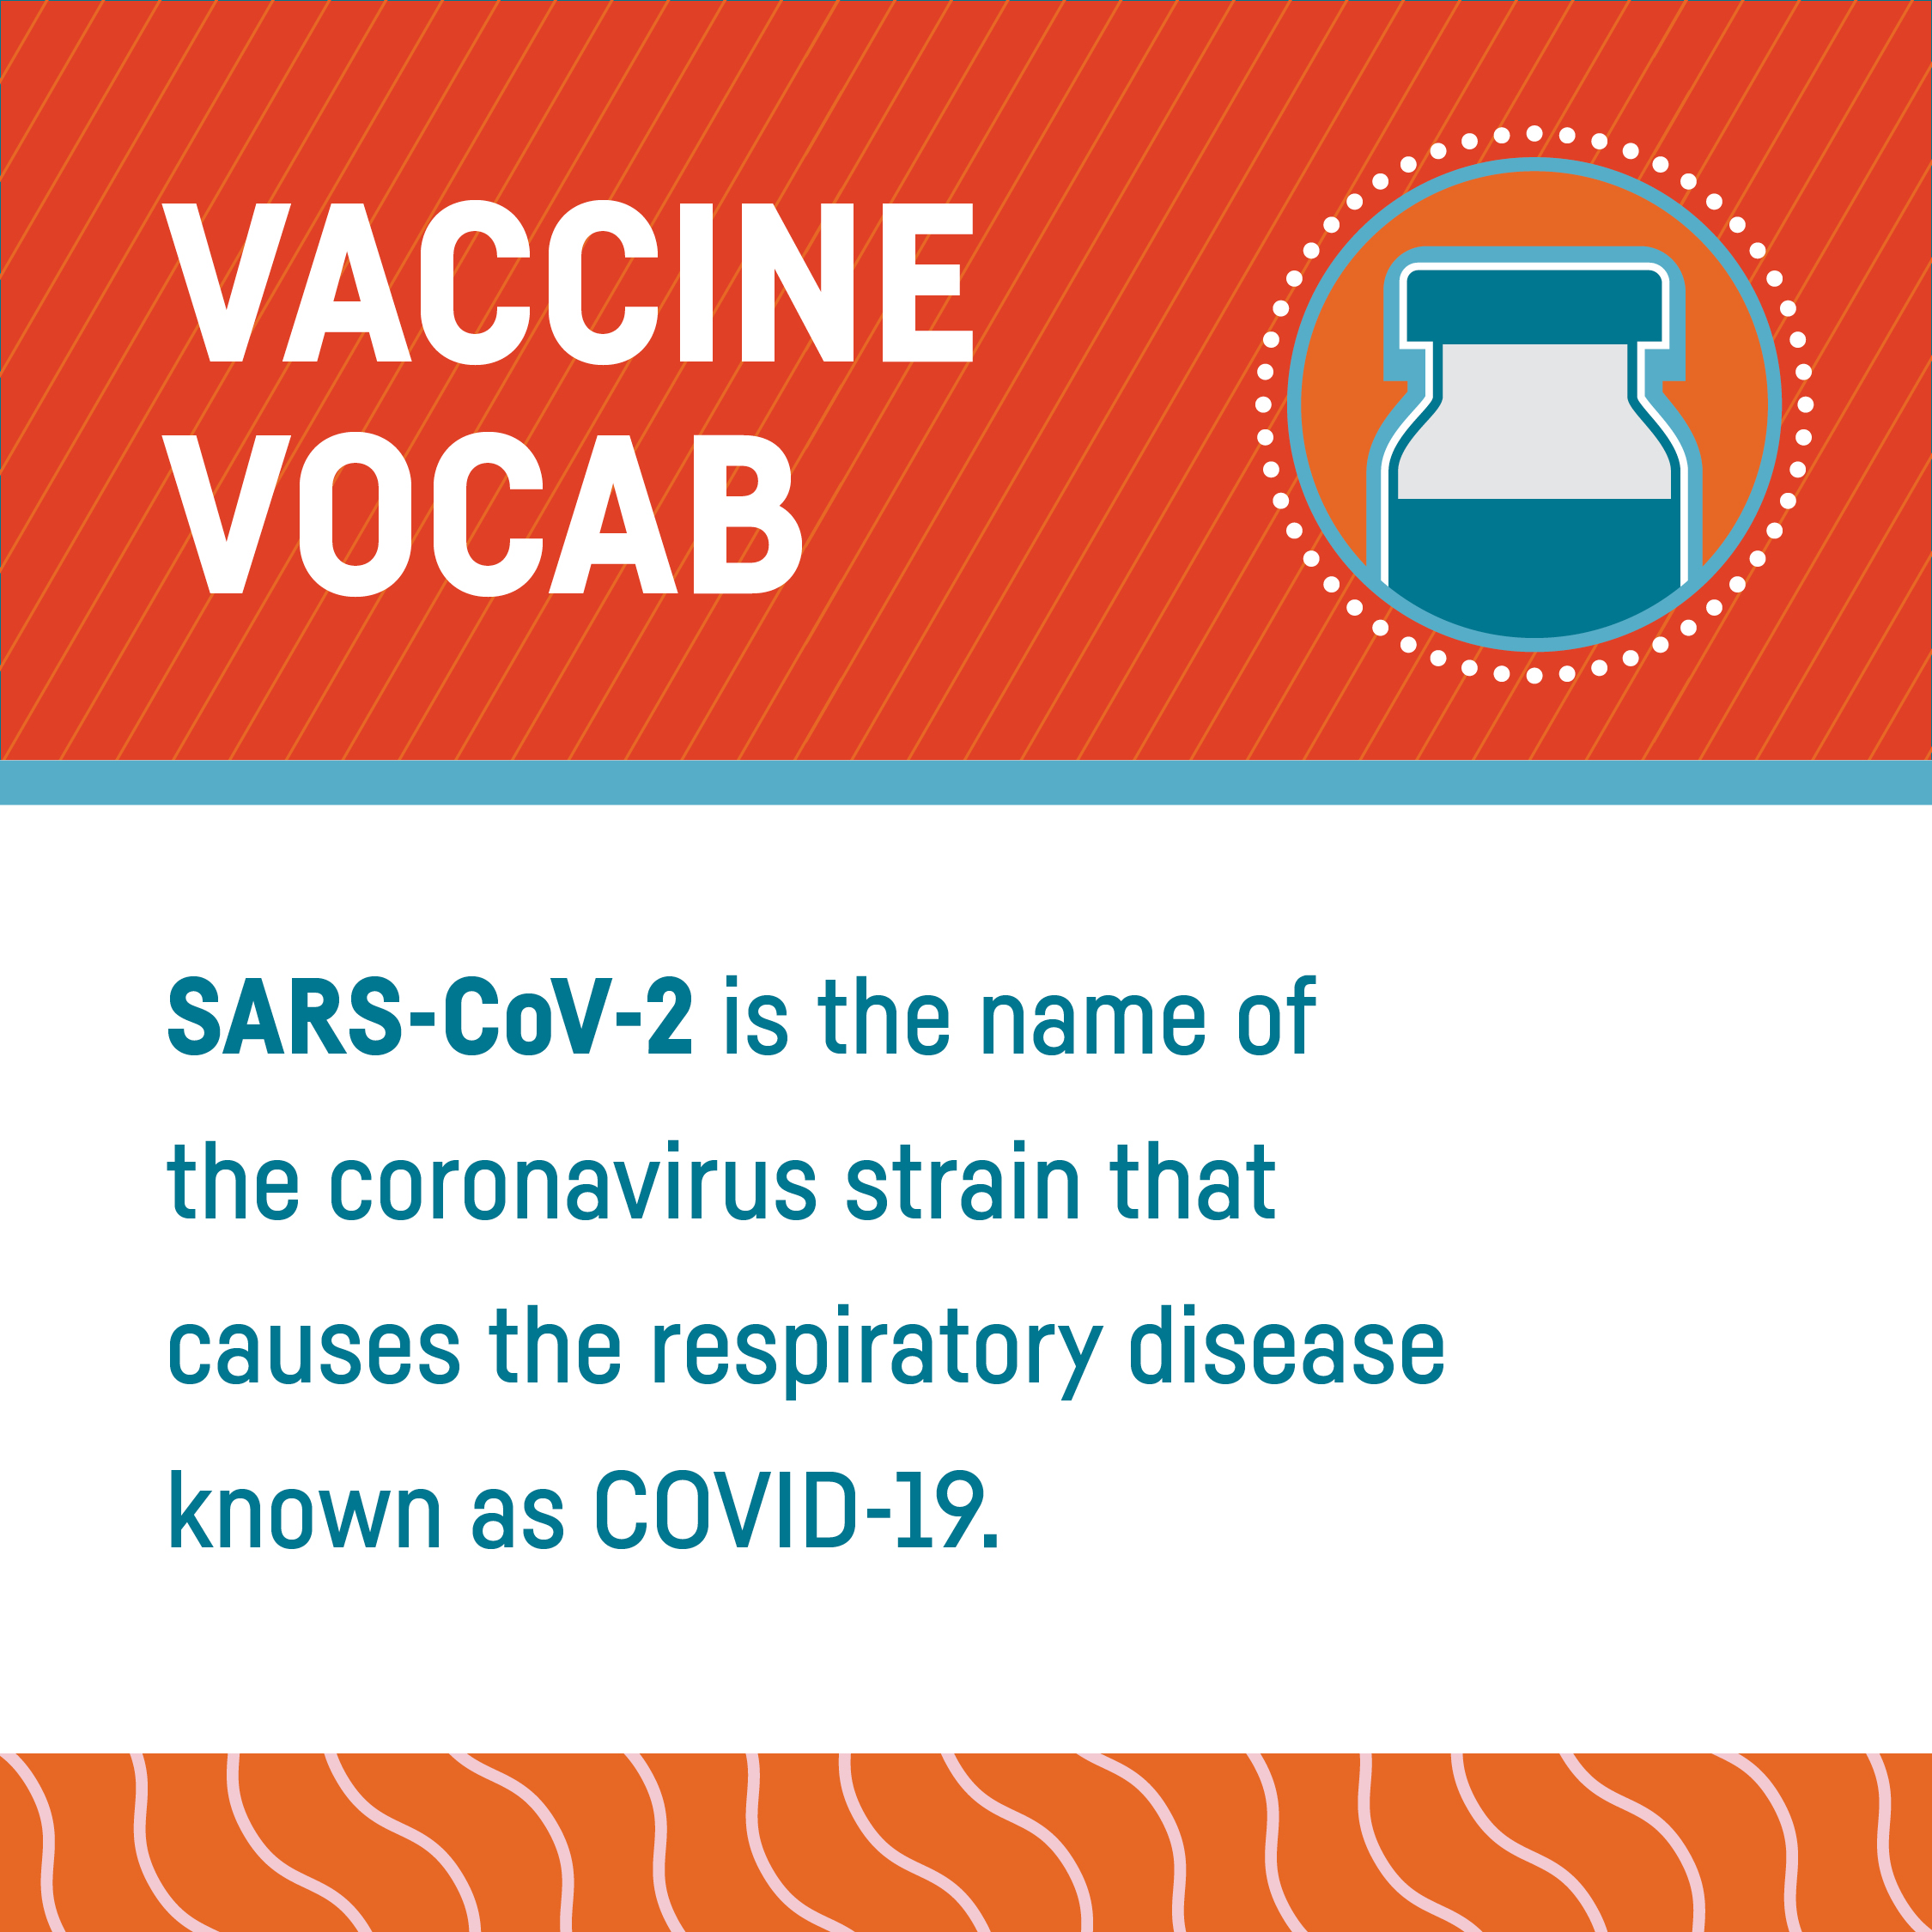 SARS-CoV-2 is the name of the coronavirus strain that causes the respiratory disease known as COVID-19.